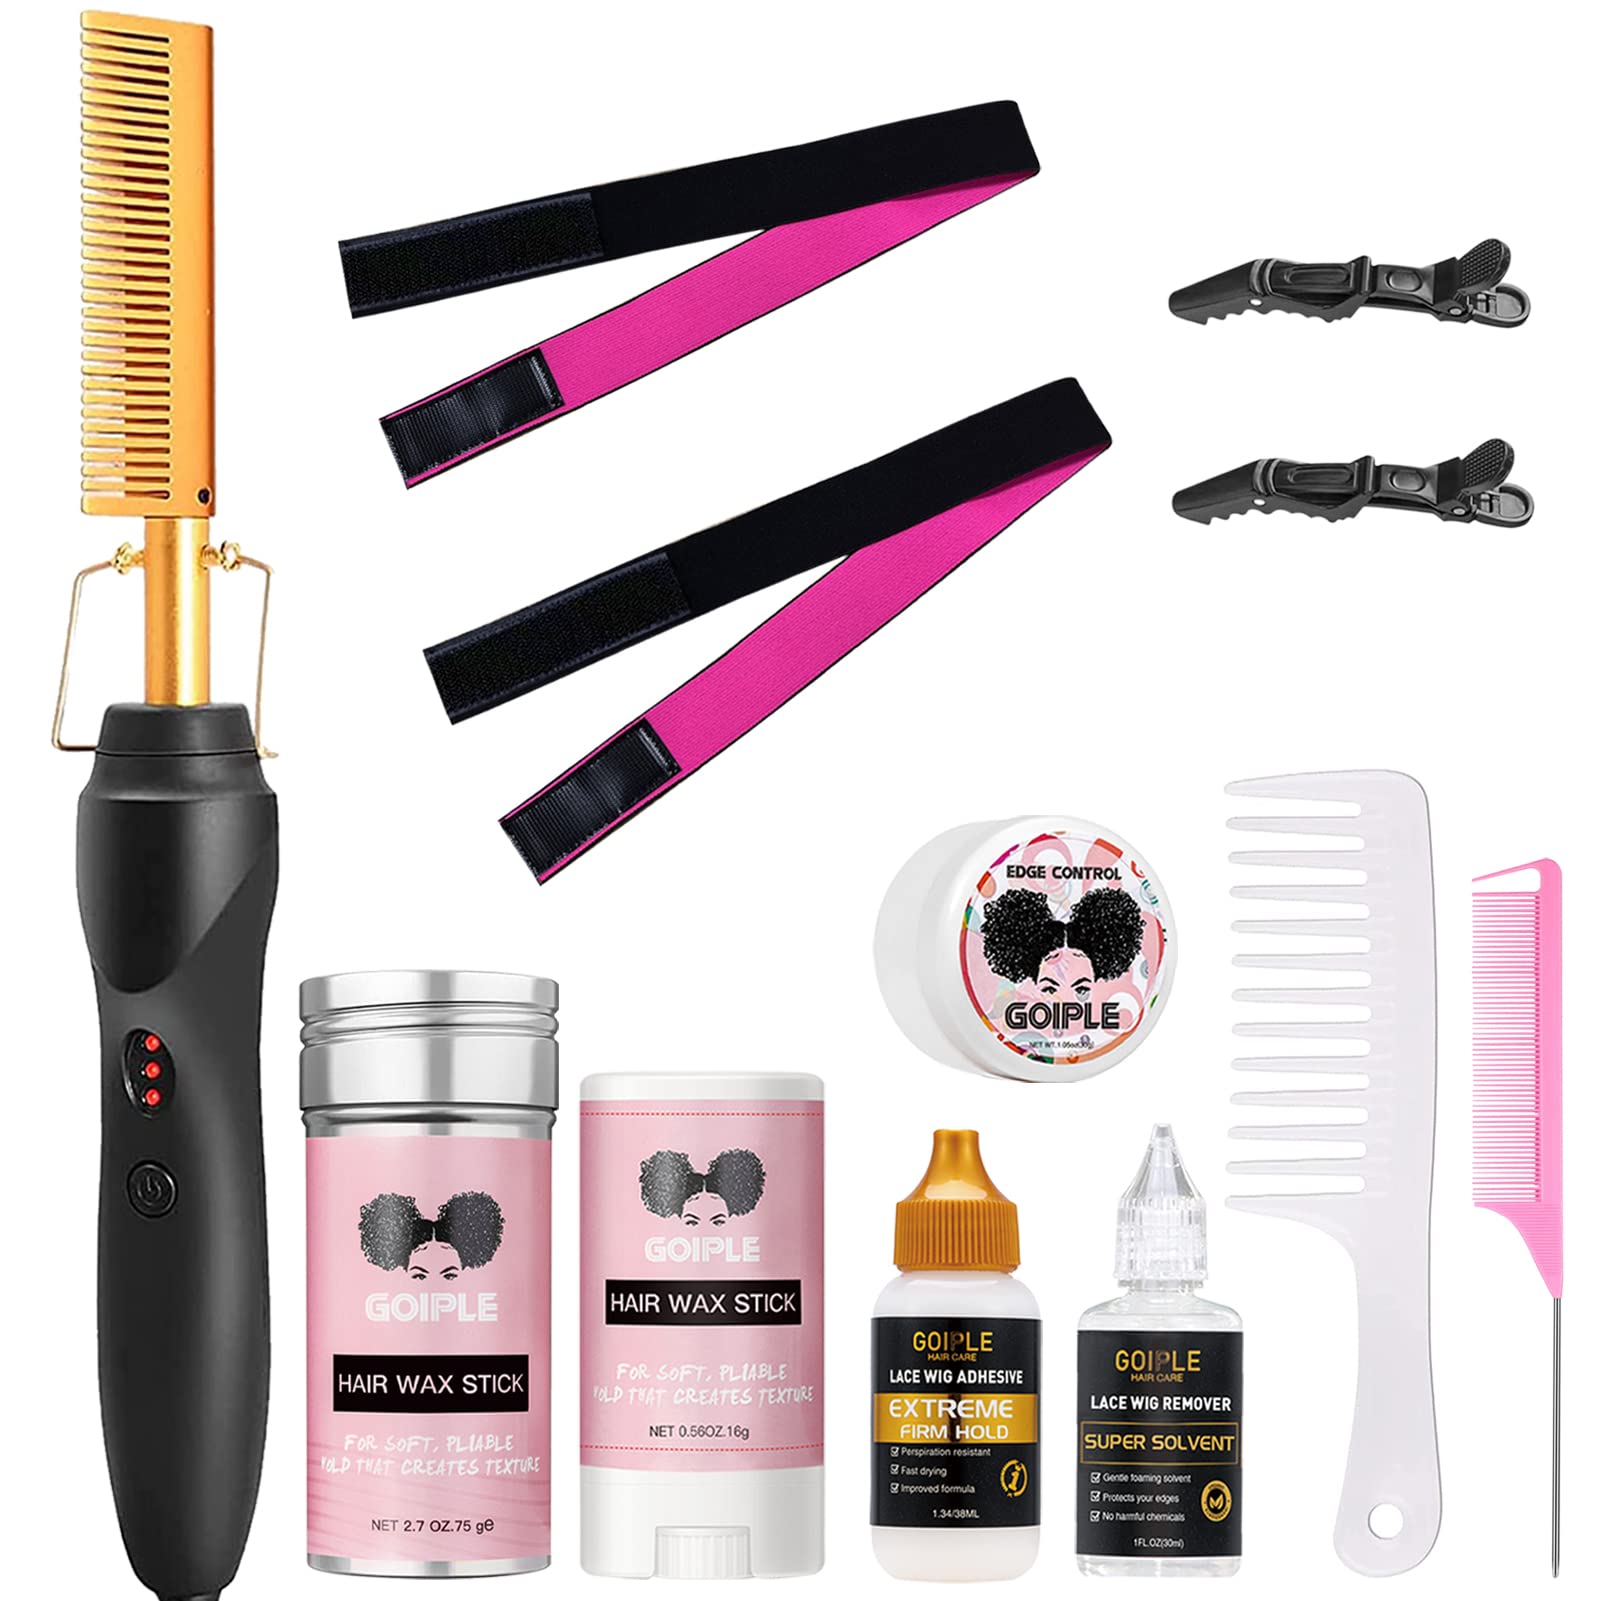  Goiple Electric Hot Comb Hair Straightener, Deluxe Electrical Straightening  Comb Curling Iron for Natural Black Hair Wigs Pressing Combs with Wig Glue  Hair Wax Stick Set : Beauty & Personal